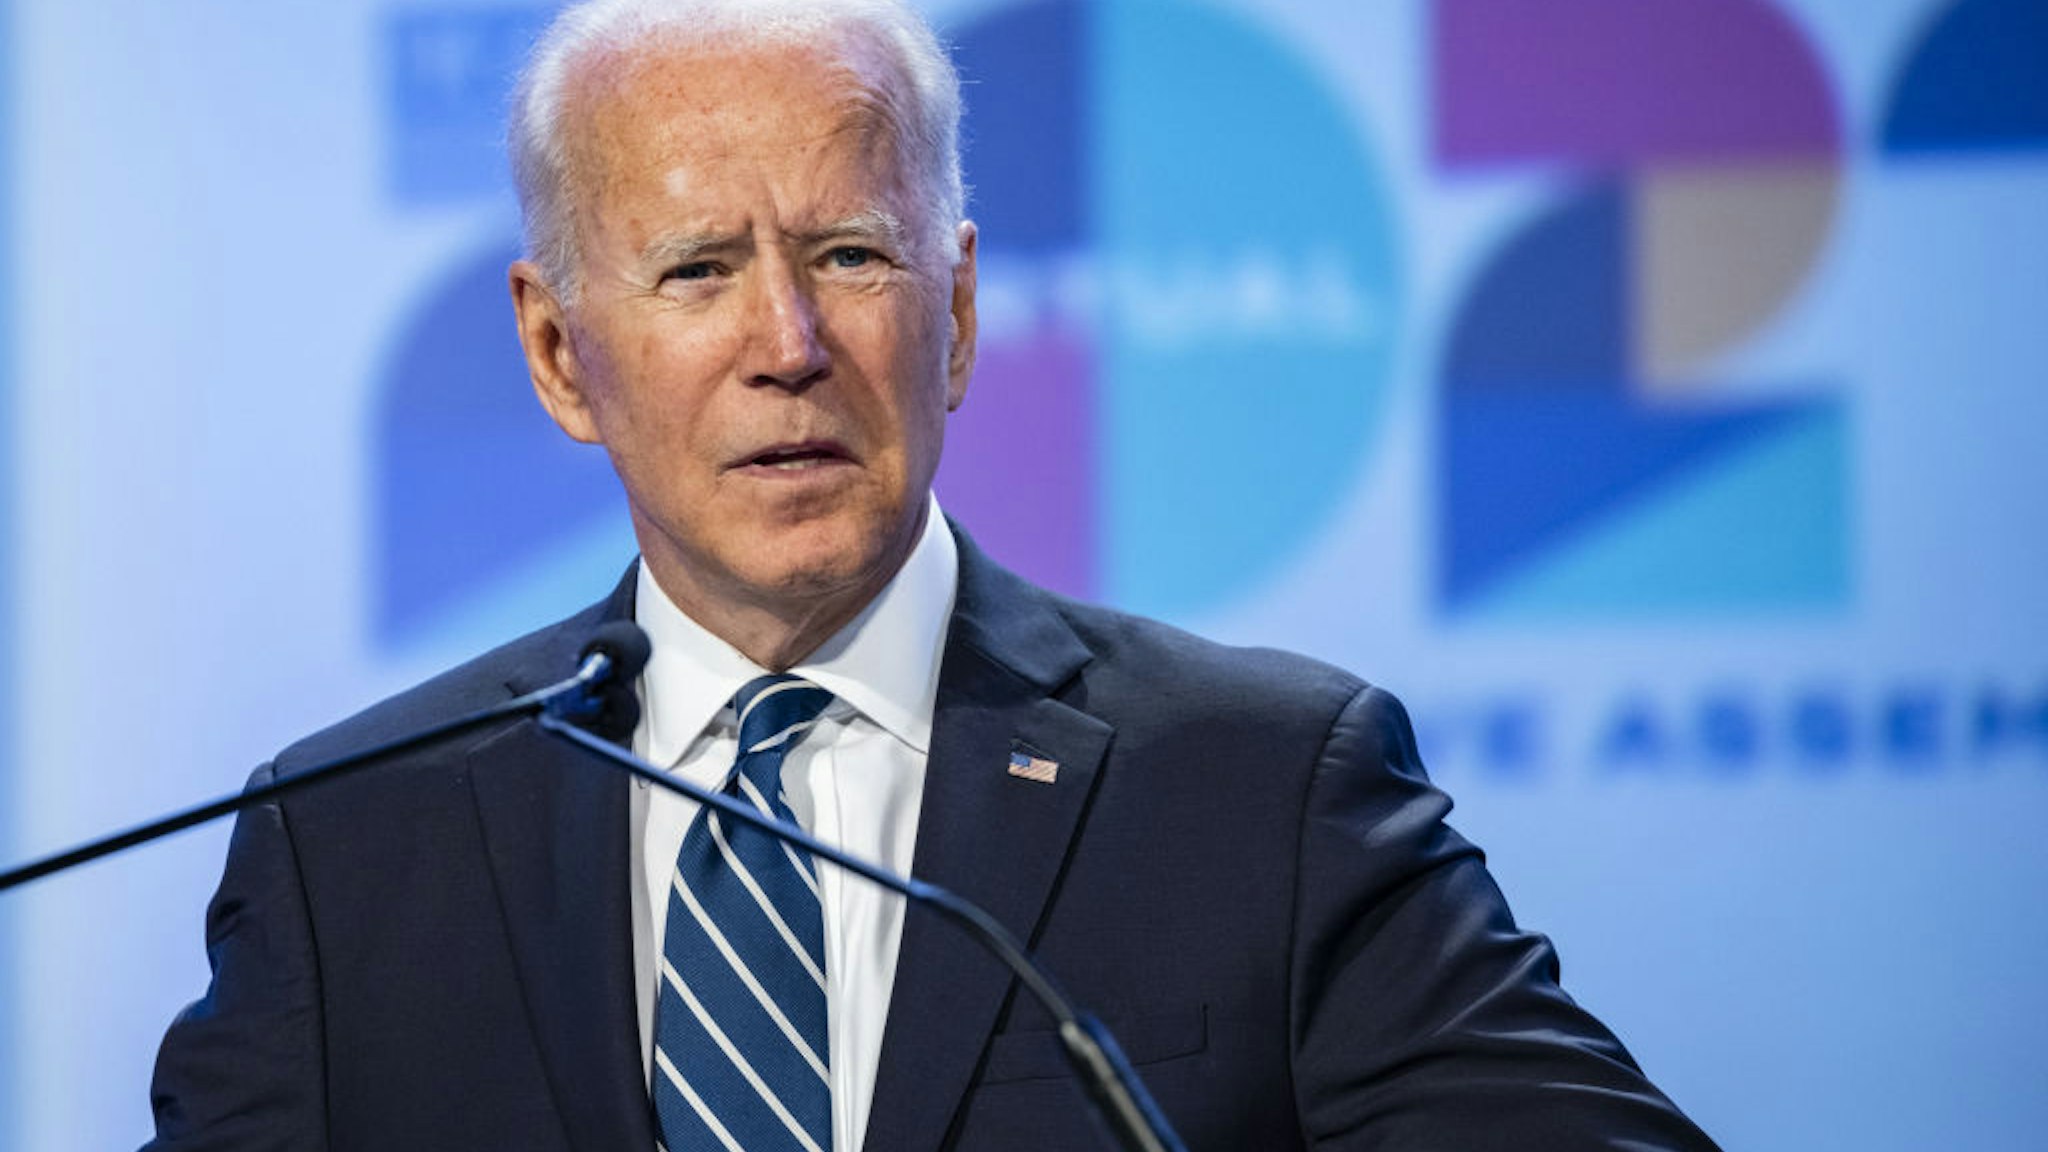 U.S. President Joe Biden speaks during the National Education Association's annual meeting and representative assembly event in Washington, D.C., U.S., on Friday, July 2, 2021. U.S. job growth accelerated in June, suggesting firms are having greater success recruiting workers to keep pace with the broadening of economic activity.